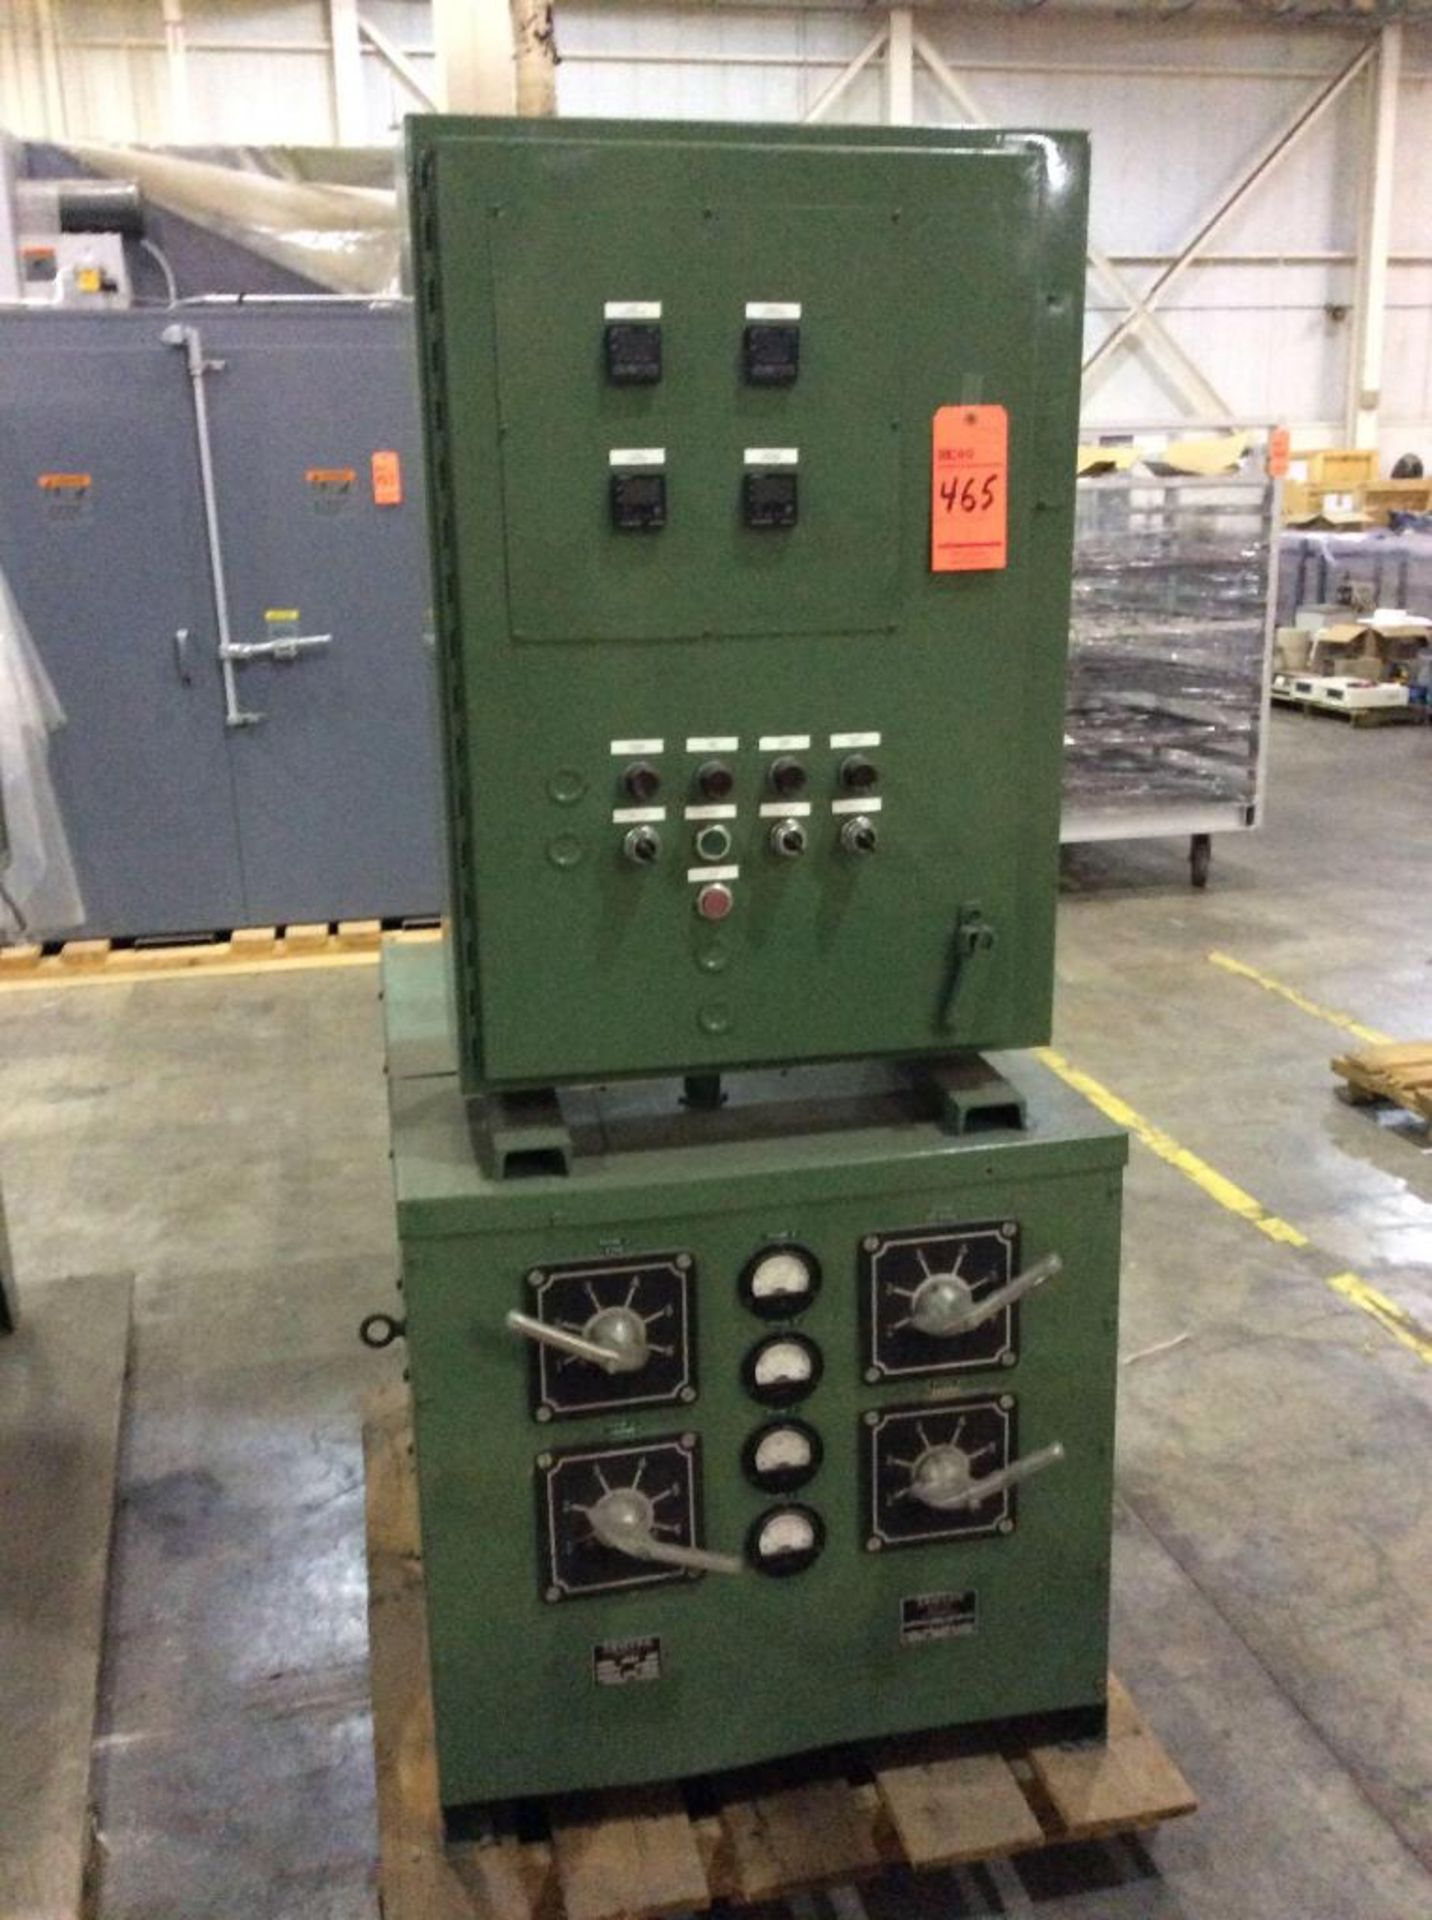 Brimstone oven, mn BF23/12-3FE, sn 83-125-3, 440 volt, 3 phase, (2) 36" x 12" x 12" compartments - Image 3 of 4